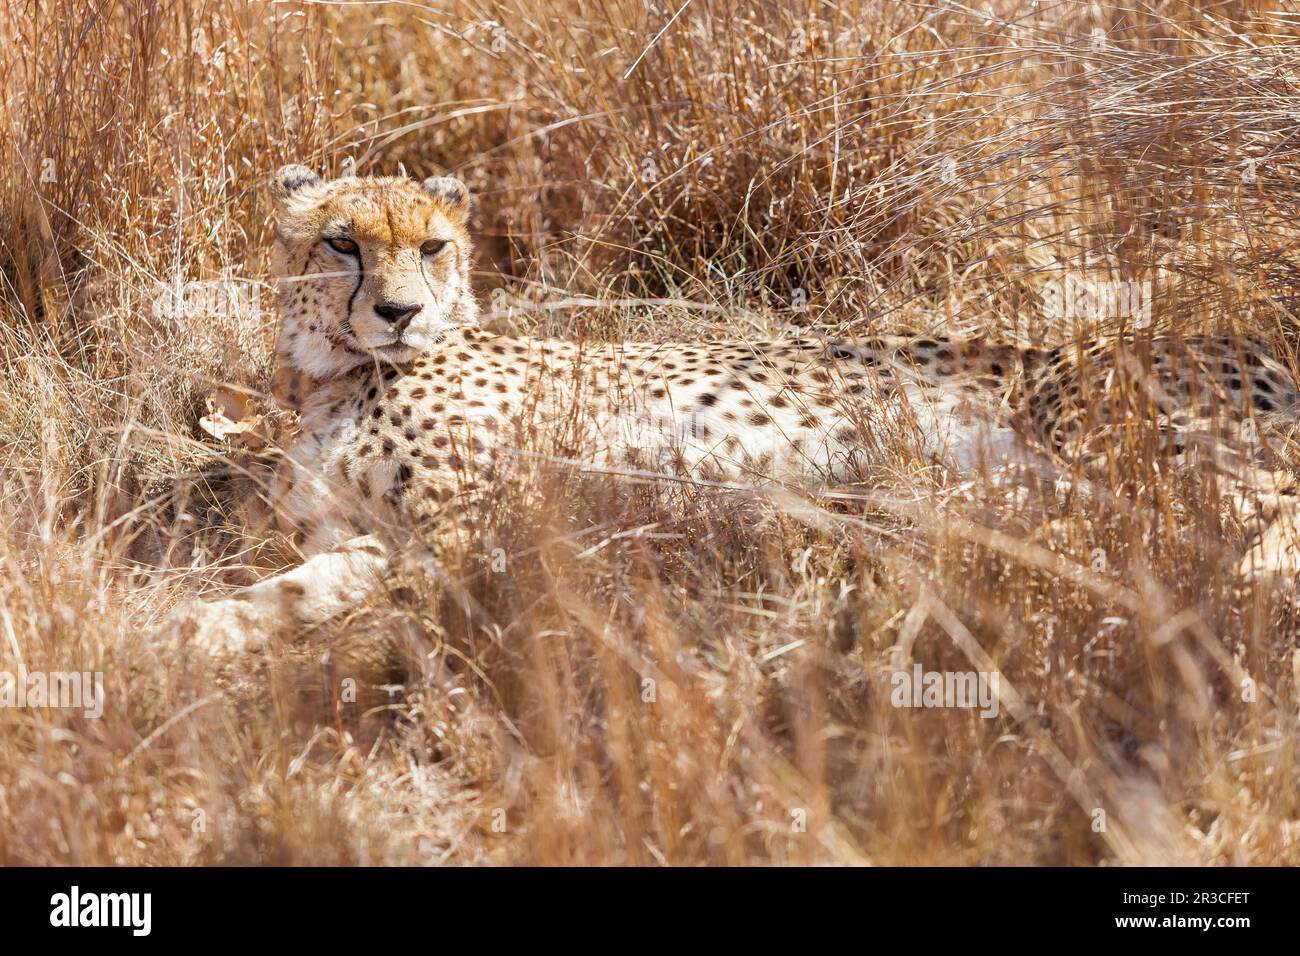 African Cheetah sitting in long grass Stock Photo